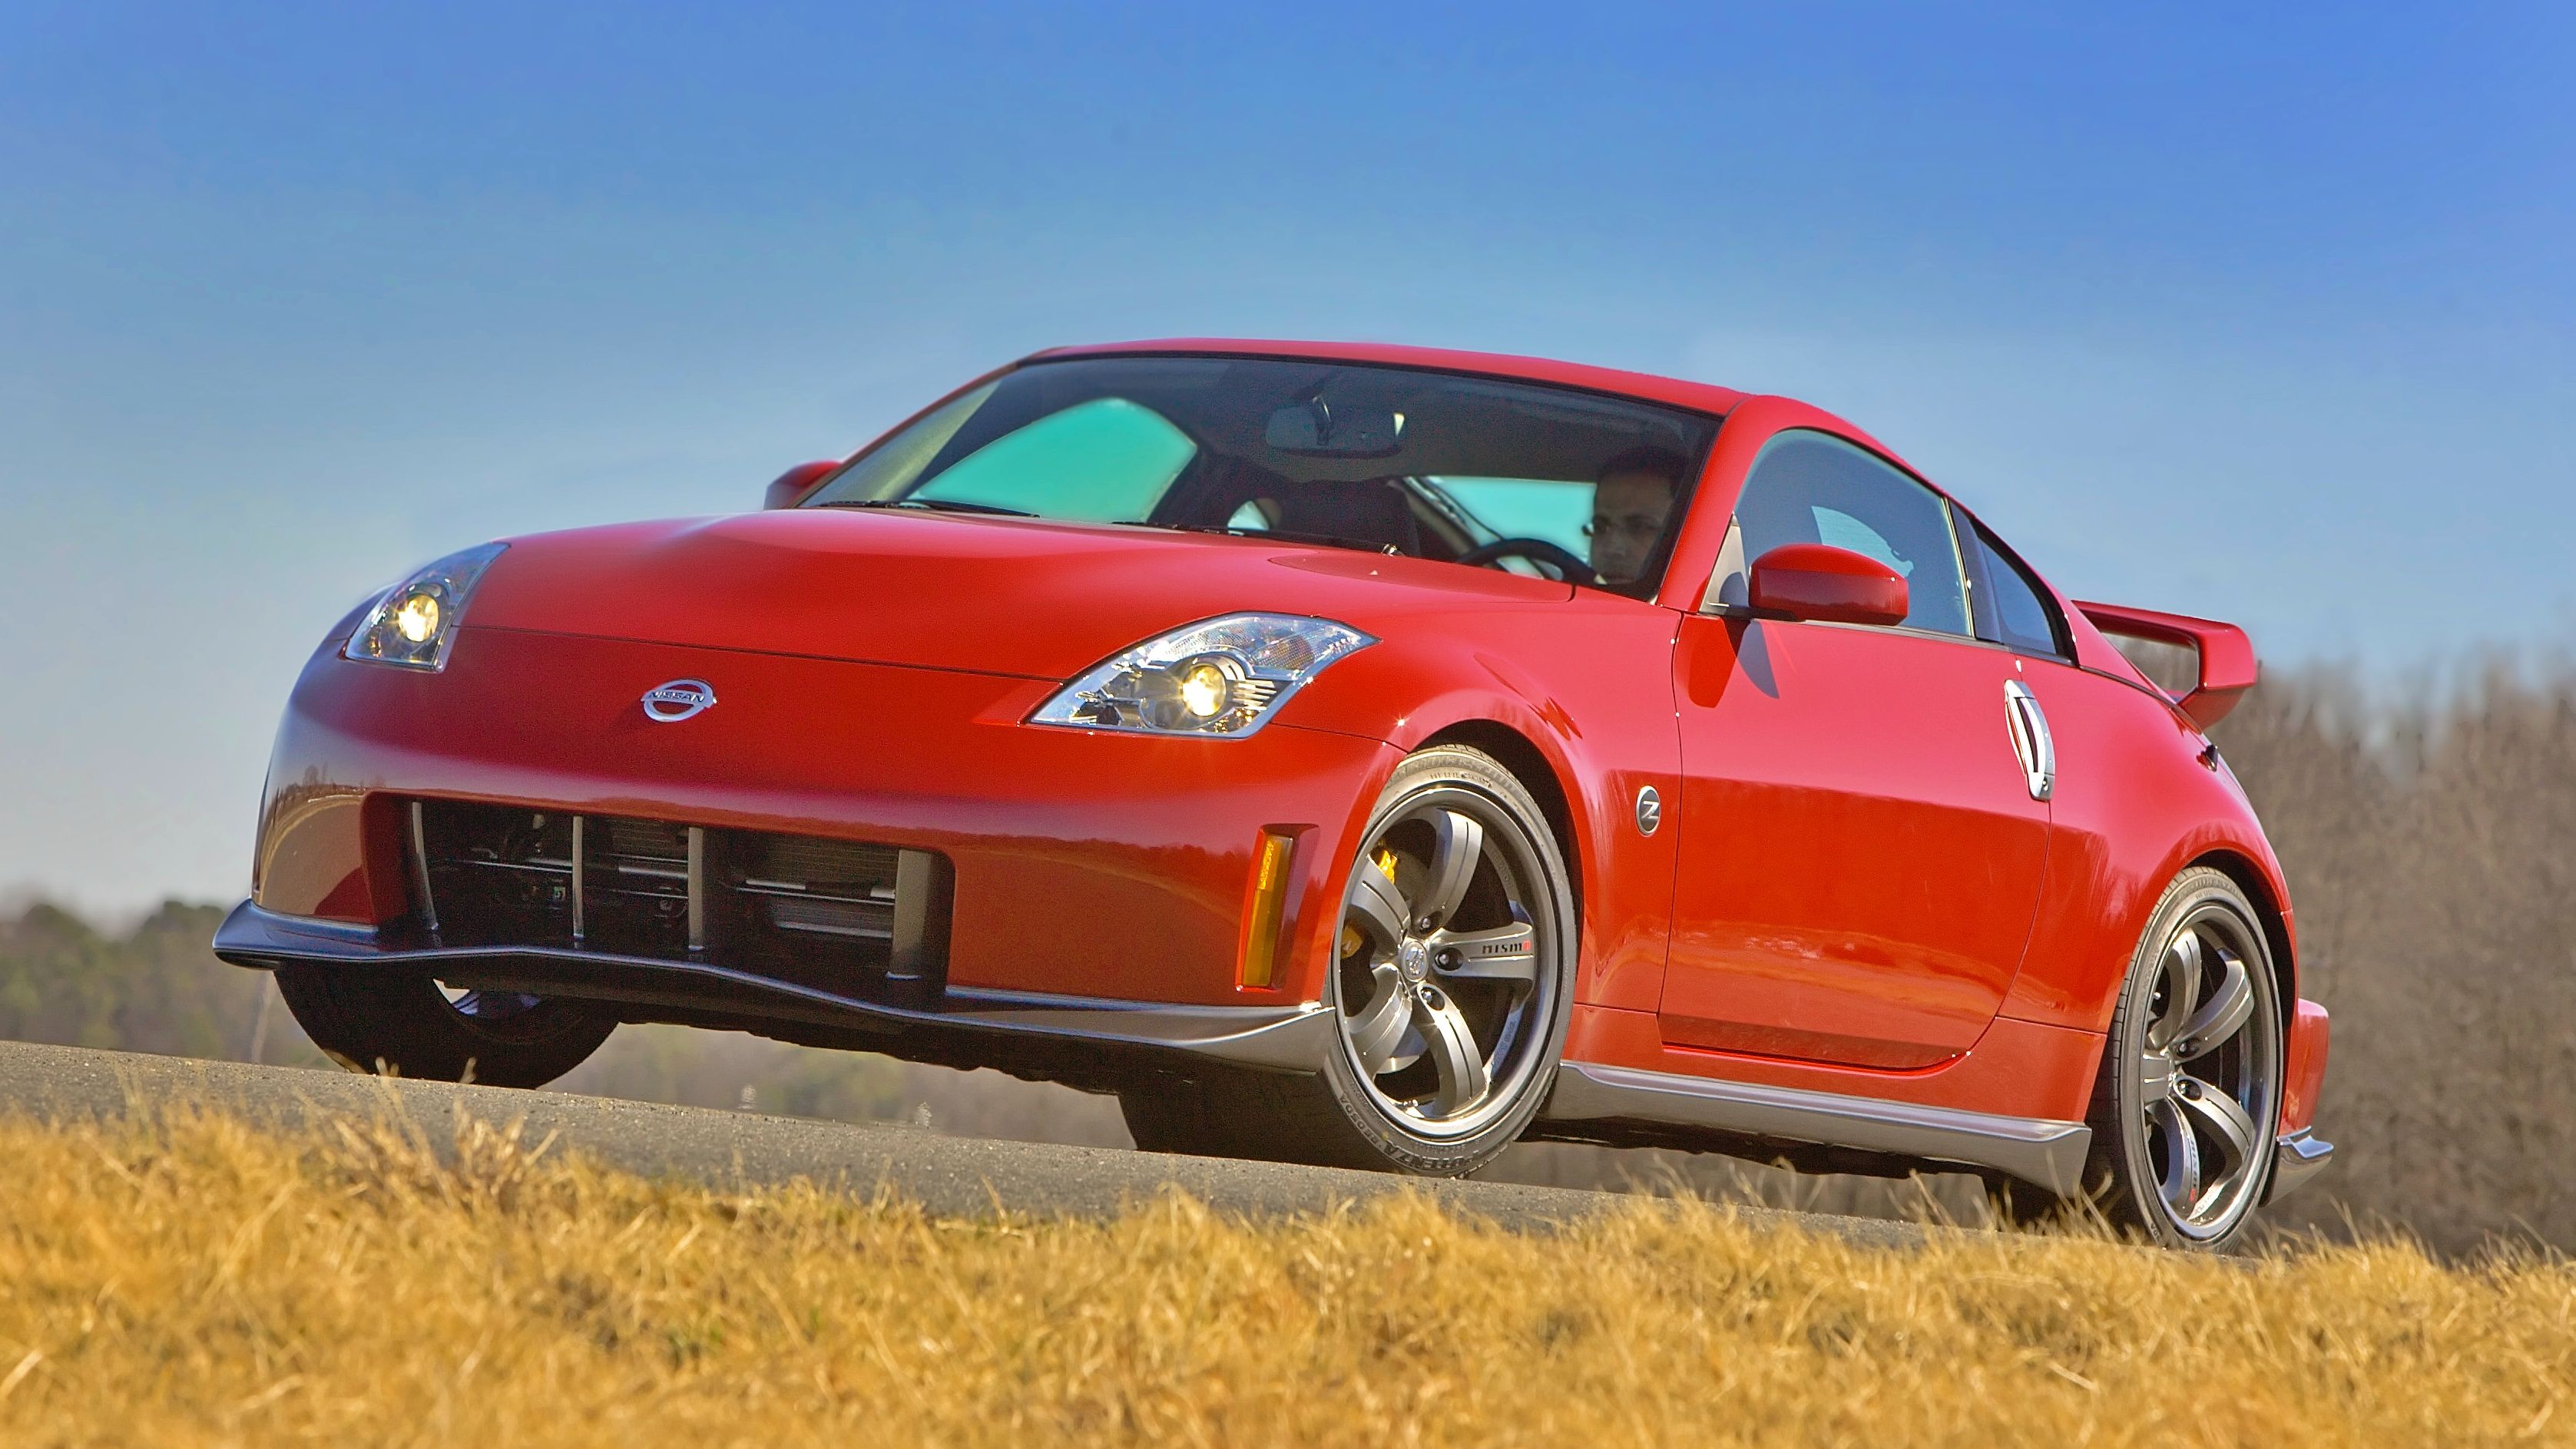 A red Nissan 350Z Coupe